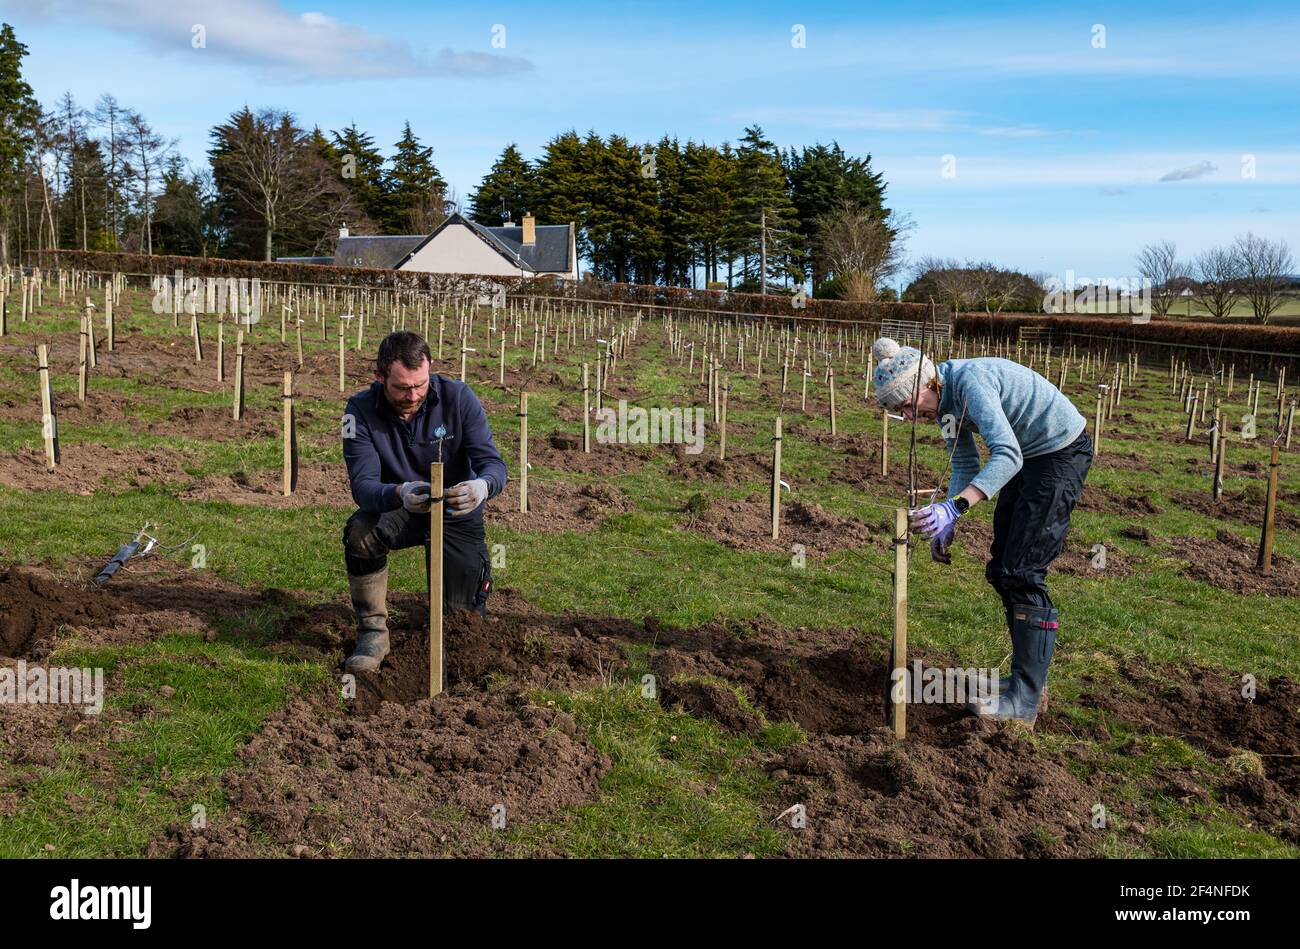 Man and woman working outdoors planting apple trees in an apple tree orchard, Kilduff Farm, East Lothian, Scotland, UK Stock Photo